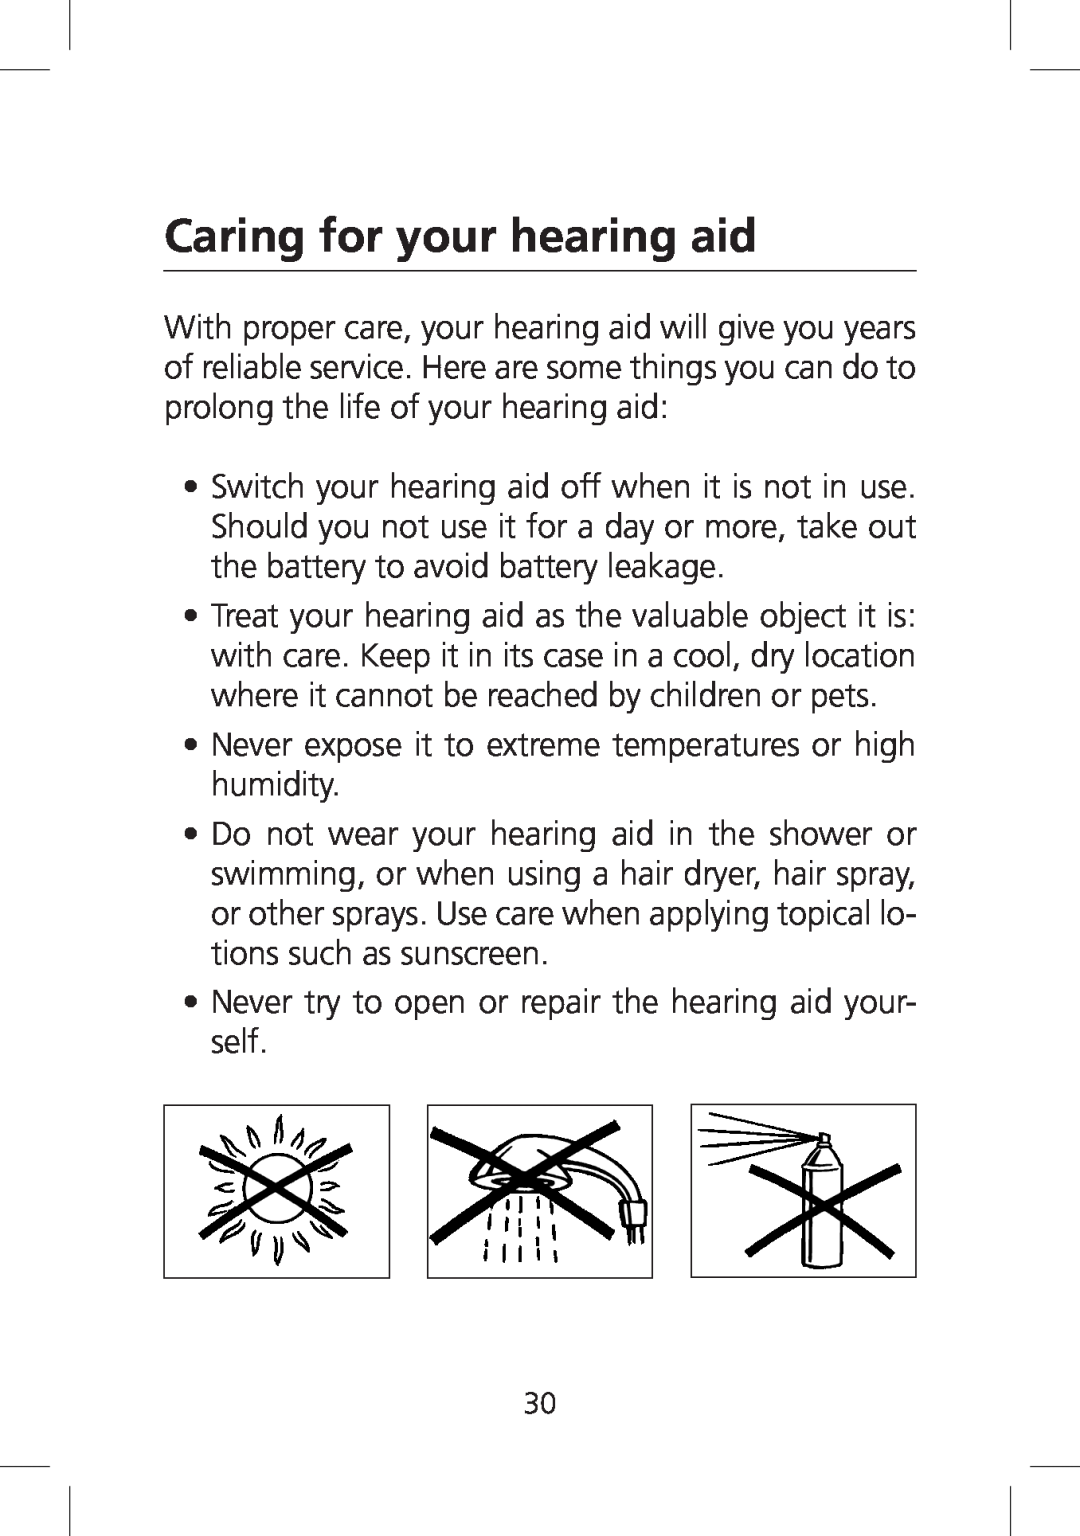 SV Sound SV-19 manual Caring for your hearing aid 